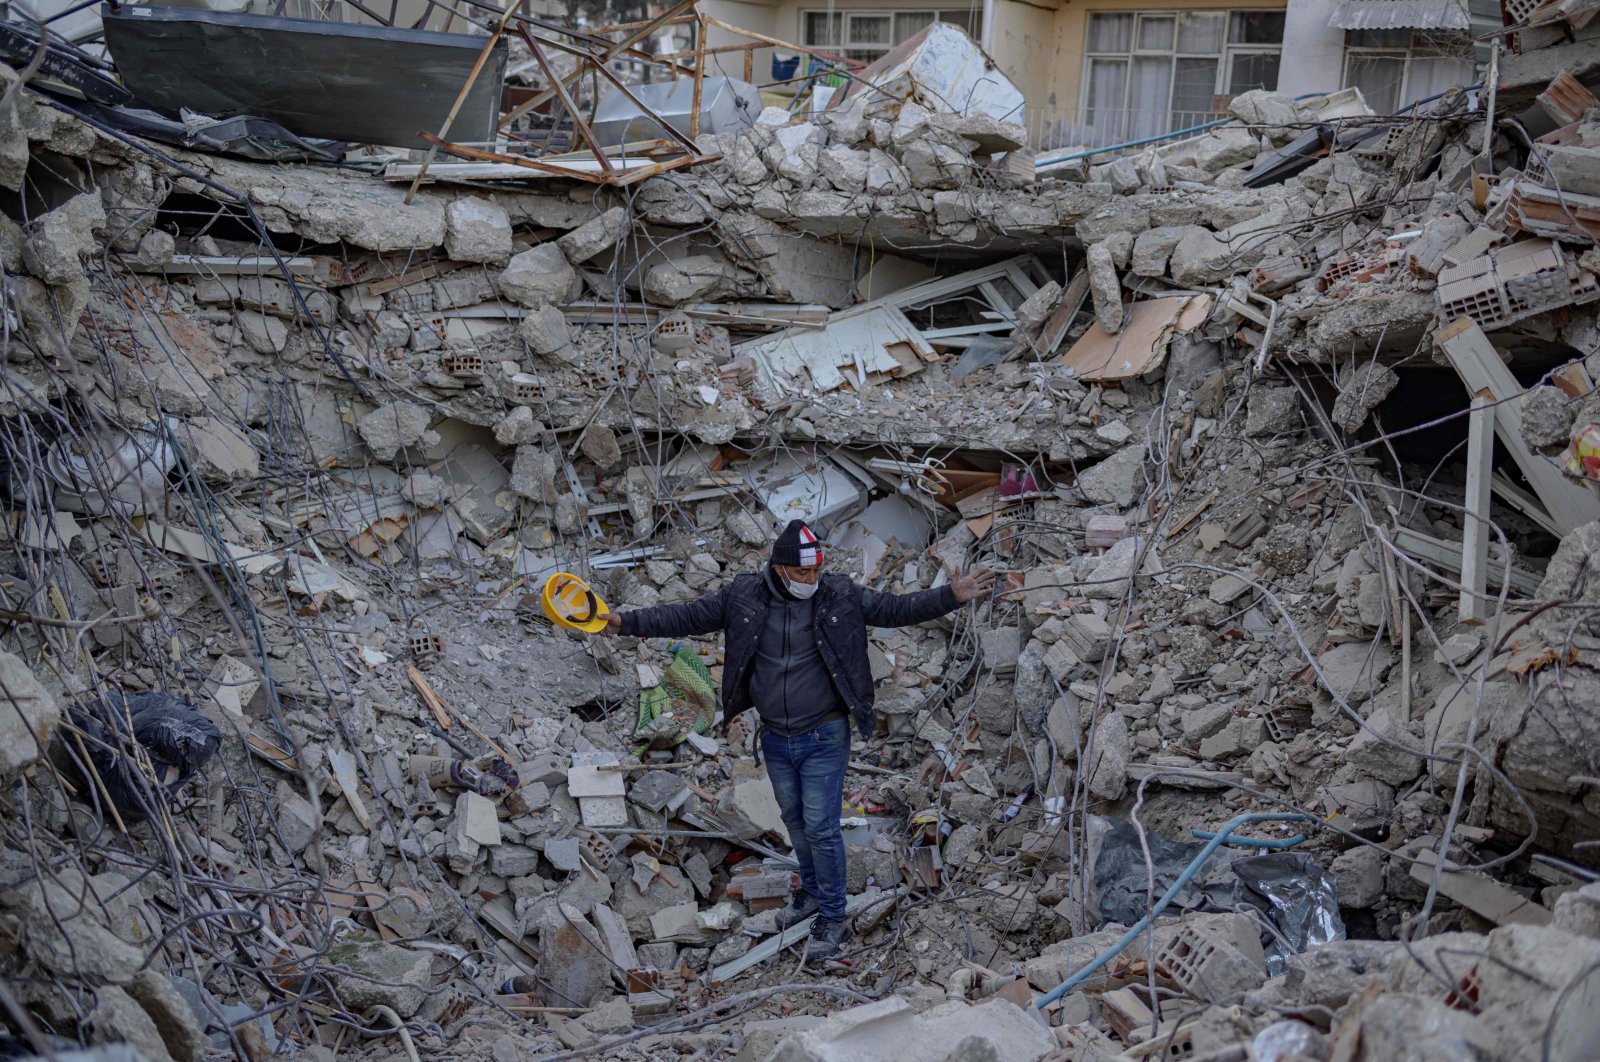 A man stands amid the rubble of a collapsed building after the deadly earthquake in Antakya, south of Hatay province, Türkiye, Feb. 15, 2023. (AFP Photo)